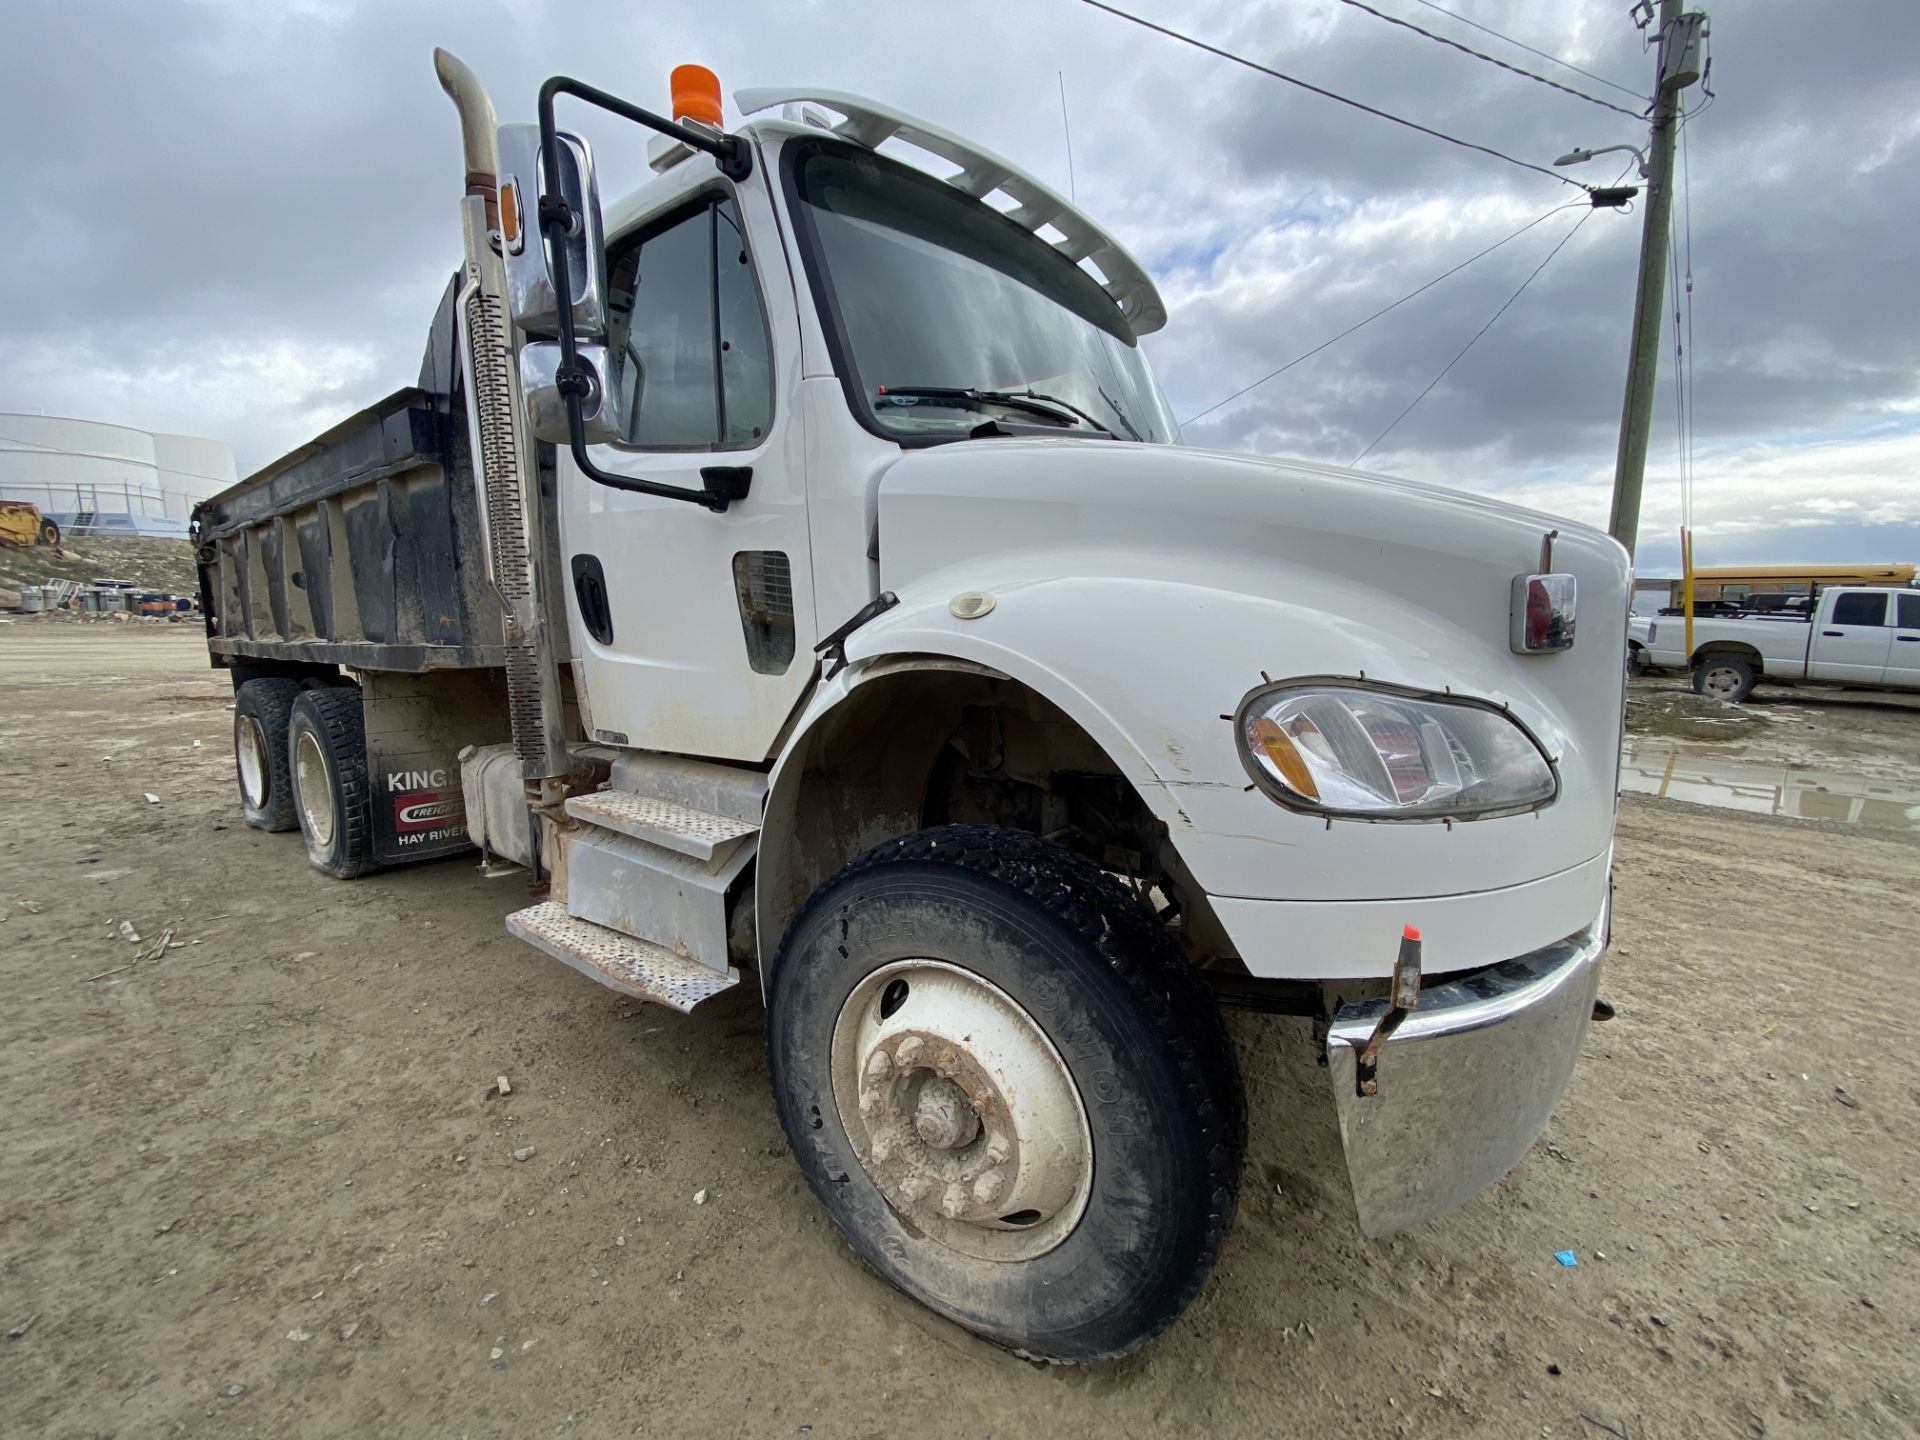 2013 FREIGHTLINER T/A DUMP TRUCK, 71610KM, S/N 1FVHCYBS1DHFF5220 - M, UNKNOWN CONDITION - Image 2 of 3